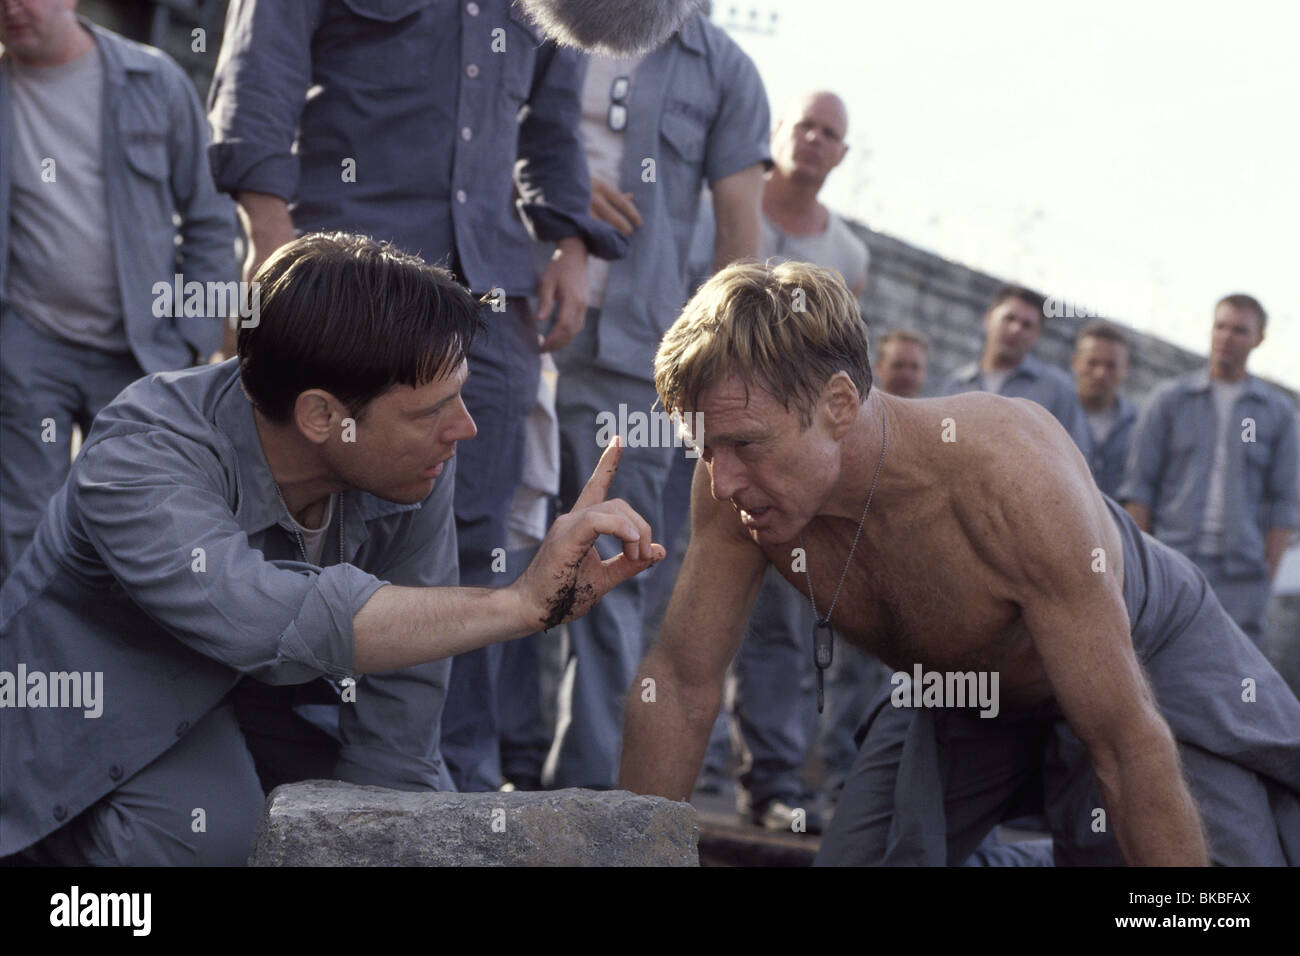 THE LAST CASTLE (2001) FRANK MILITARY, ROBERT REDFORD LACS 001 4018 Stock Photo